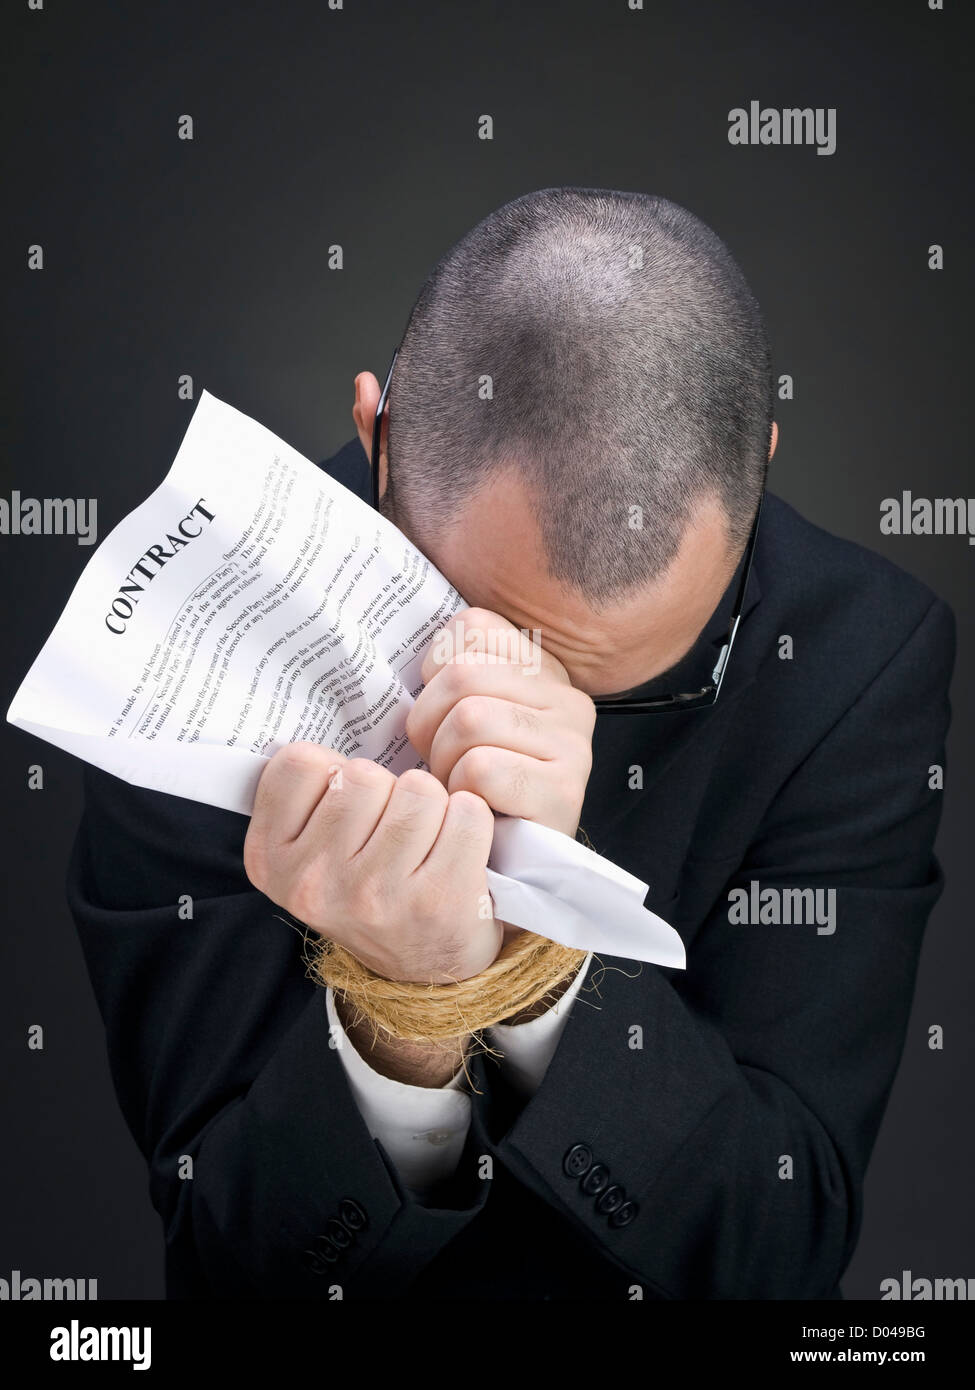 A man on a suit holds a contract on his tied hands. Stock Photo